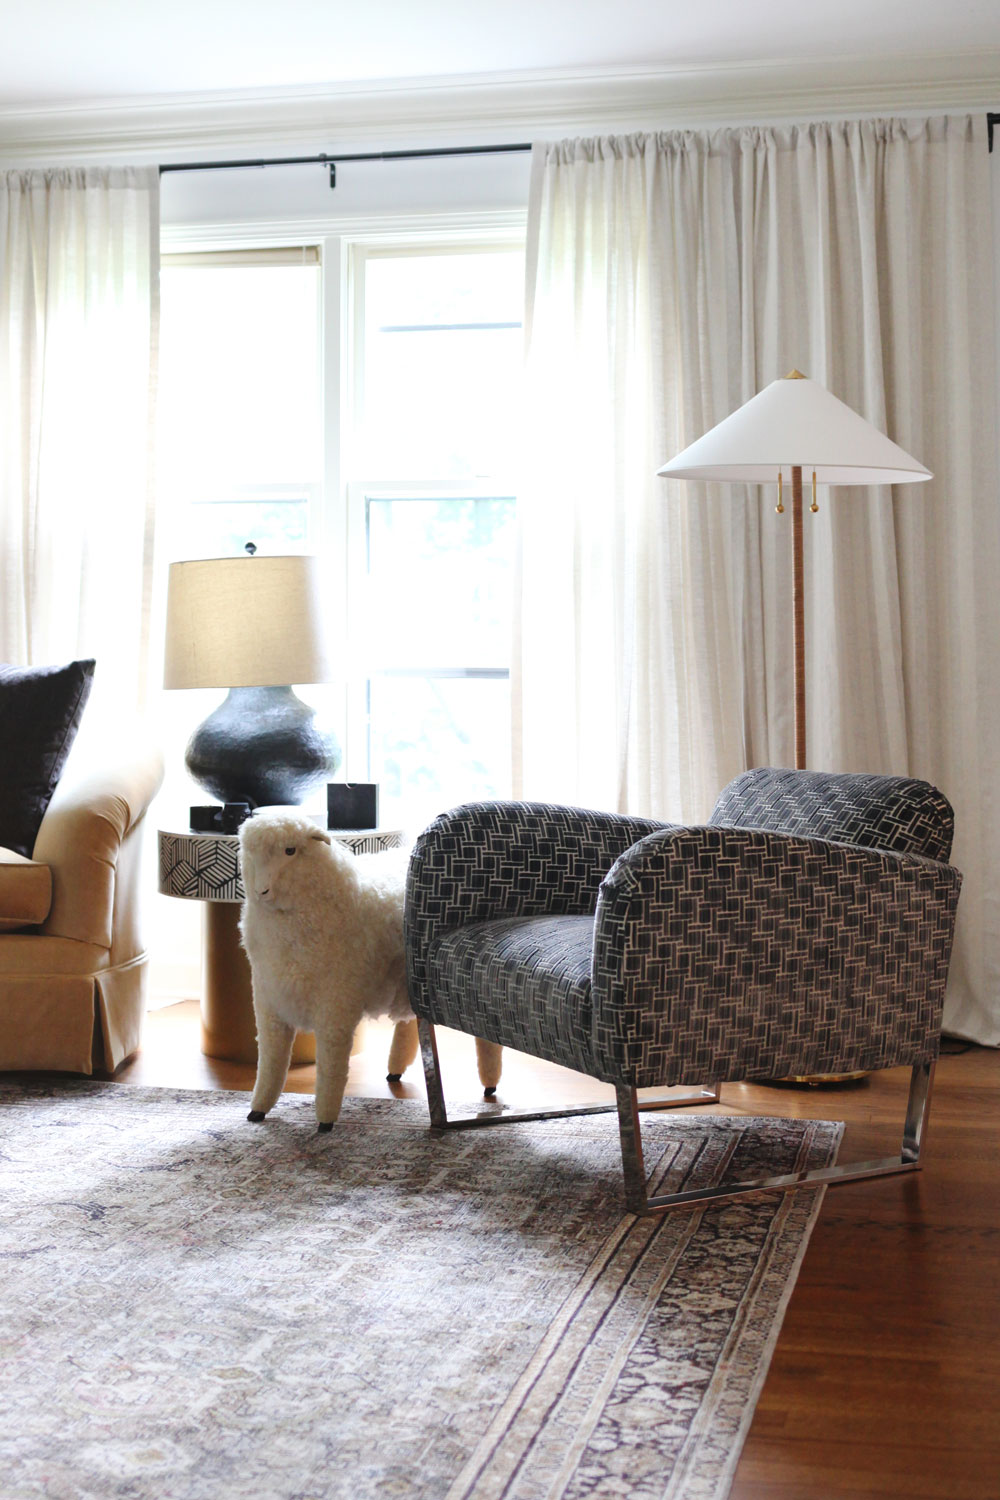 How To Choose The Best Upholstery Fabric